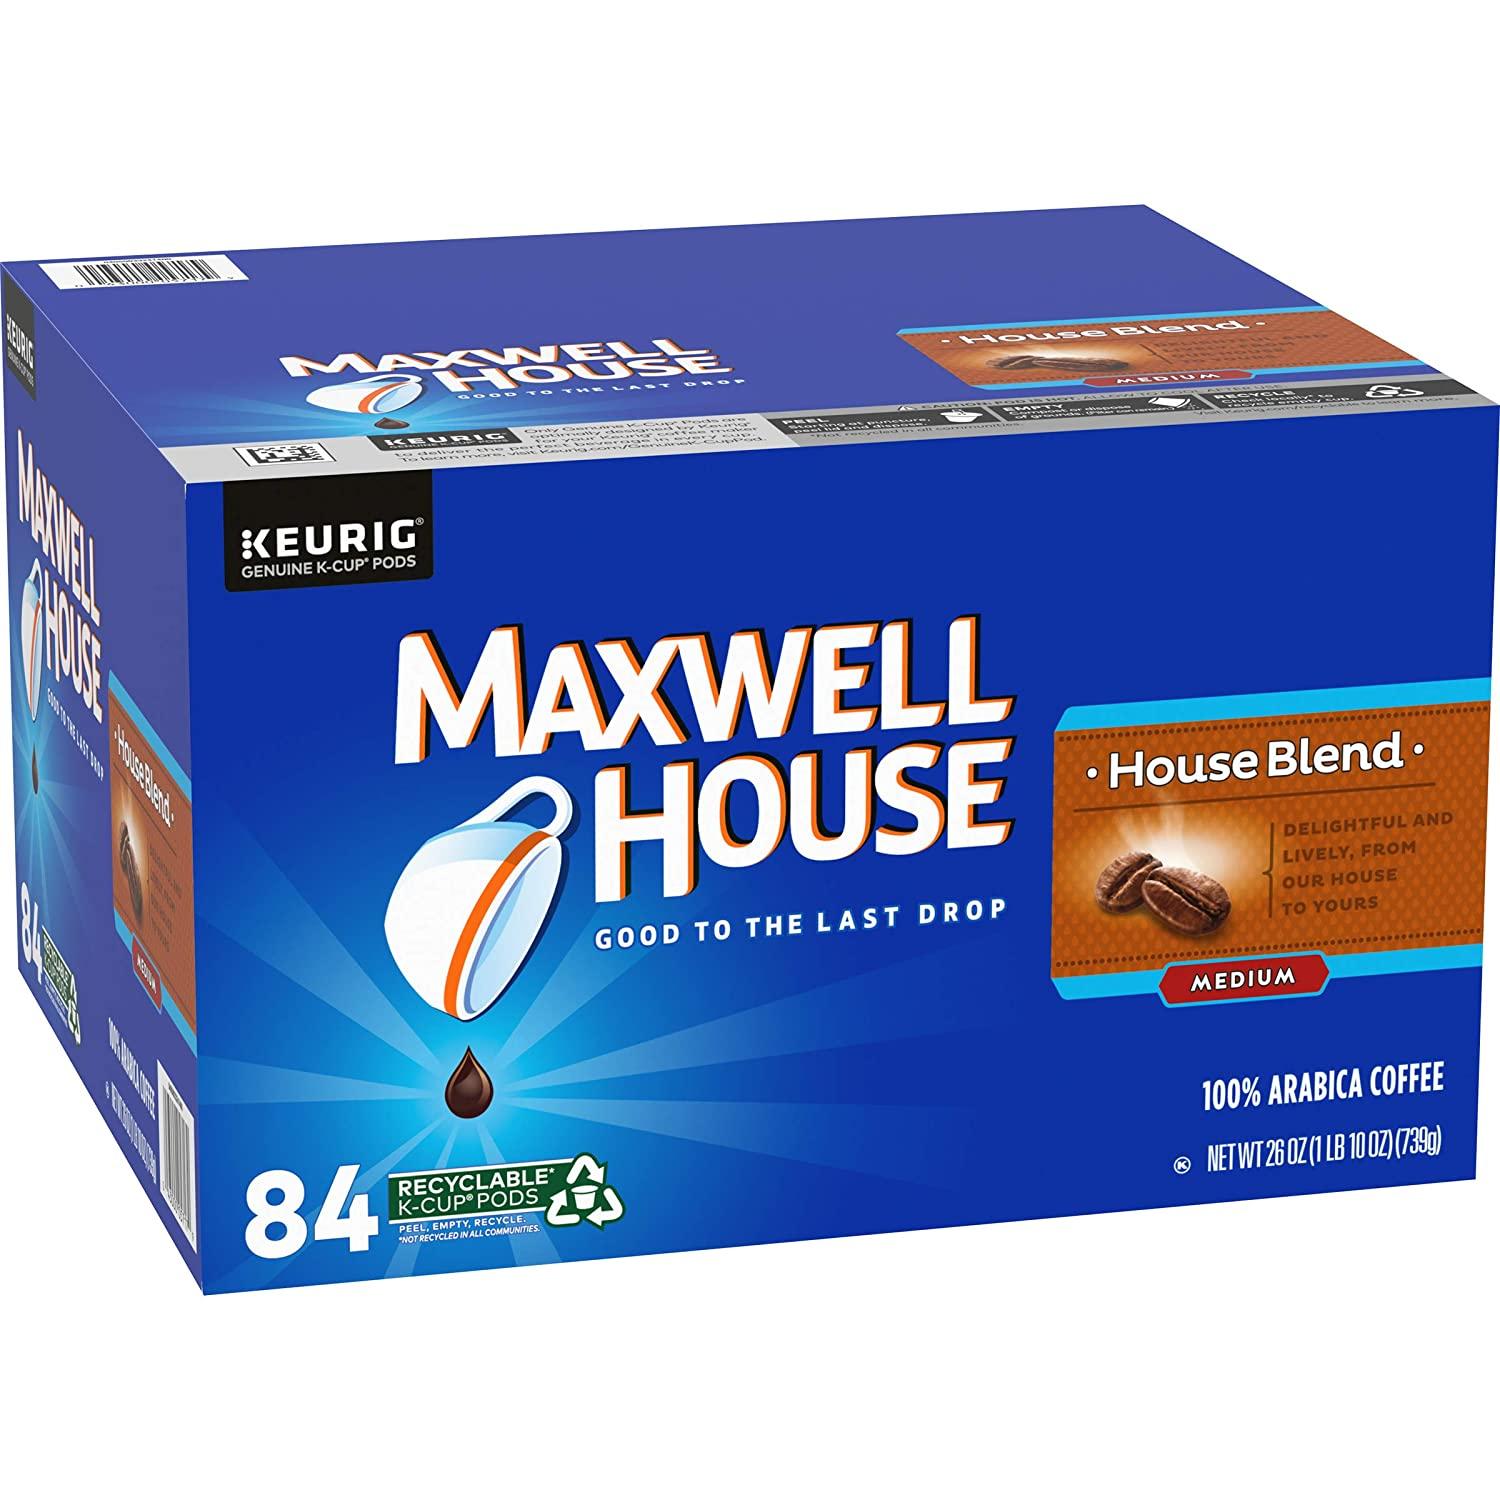 84 Maxwell House K-Cup Coffee Pods for $17.62 Shipped